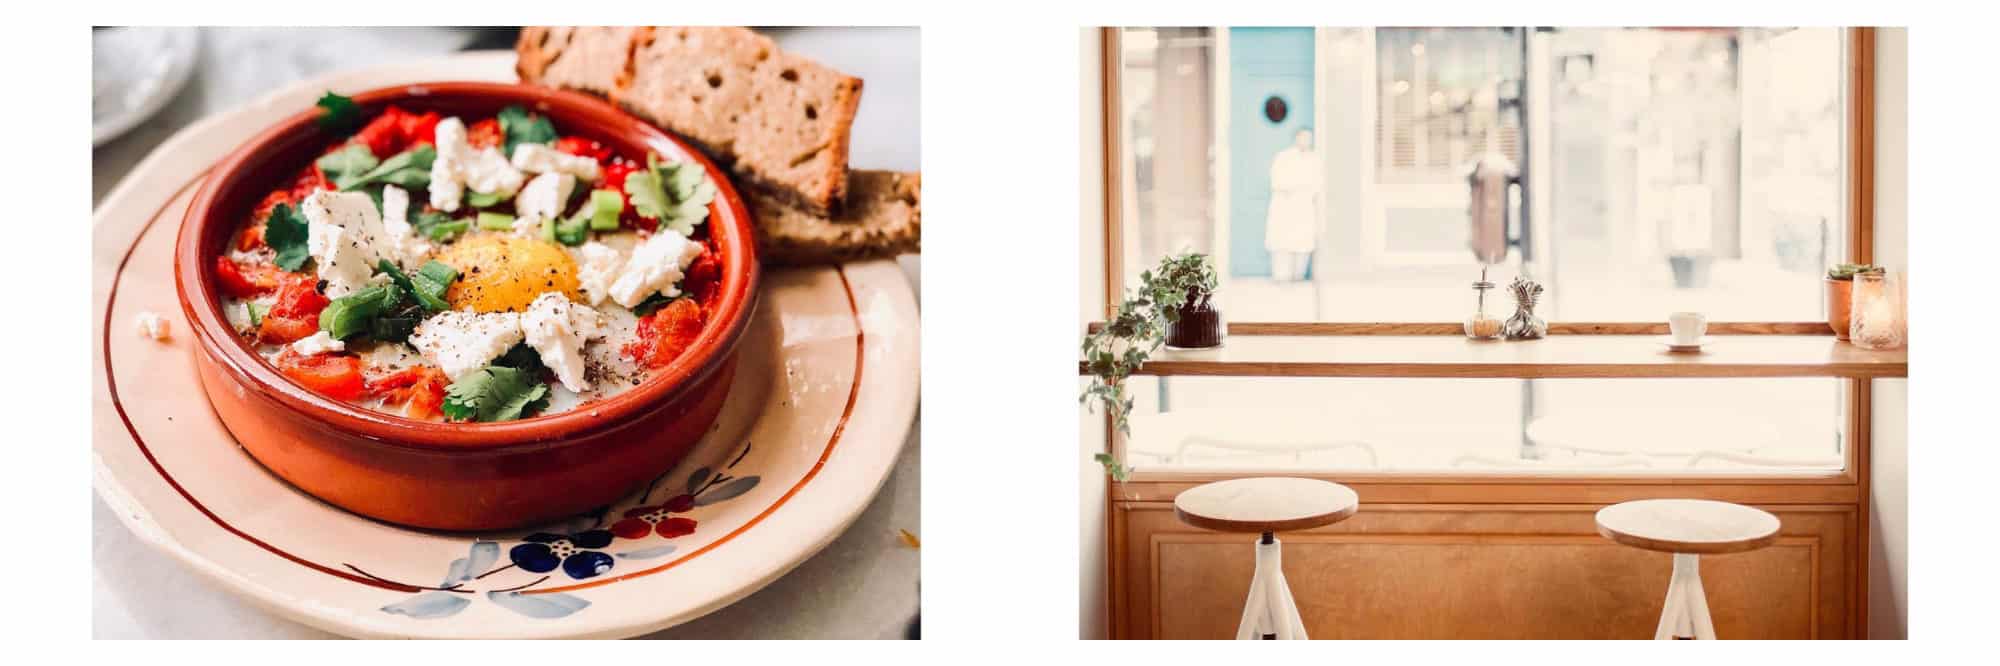 A feta dish in an earthen dish on a hand-painted plate (left) and window seating (right) at Café Pimpim in Montmartre on a Sunday.